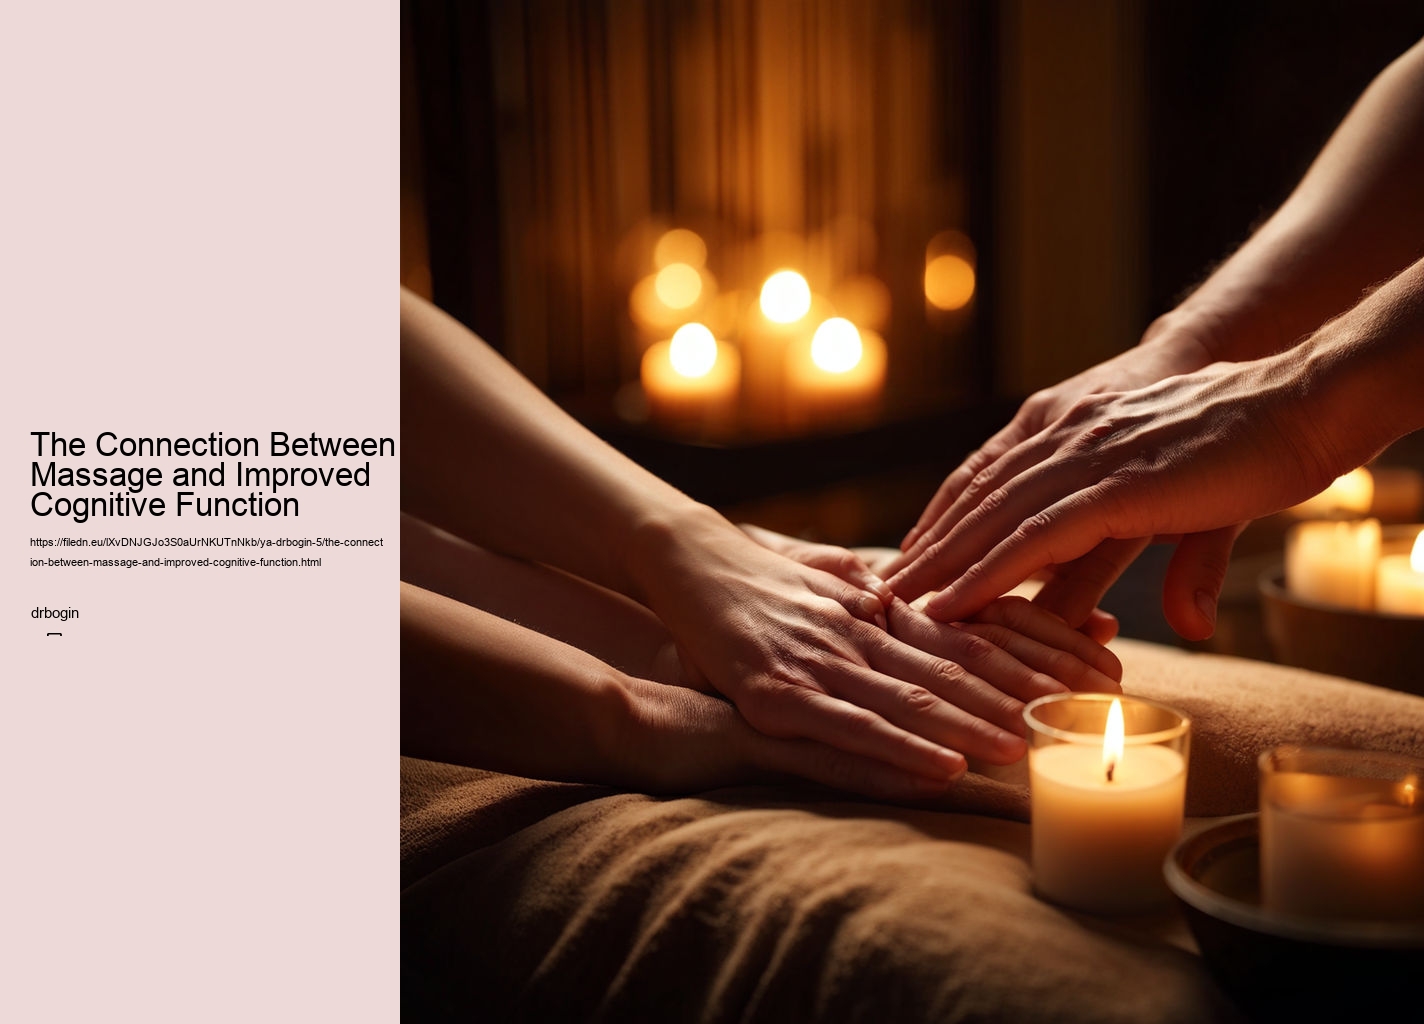 The Connection Between Massage and Improved Cognitive Function